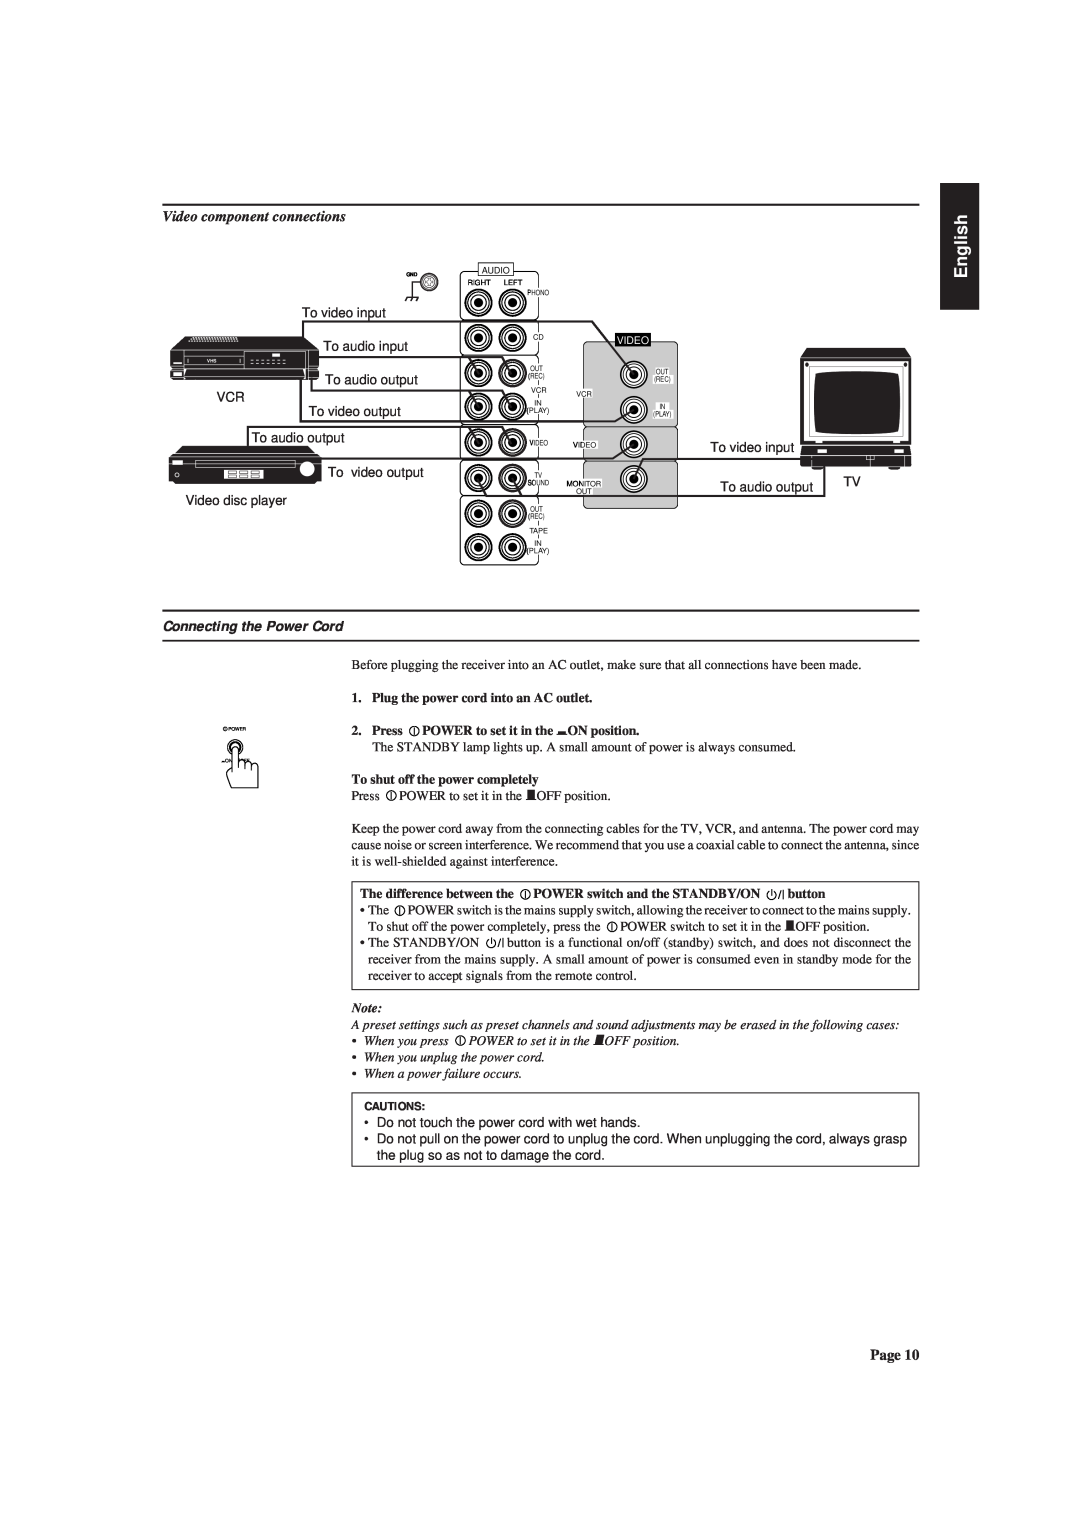 JVC RX-630RBK manual Connecting the Power Cord, Video component connections, English, Cautions 